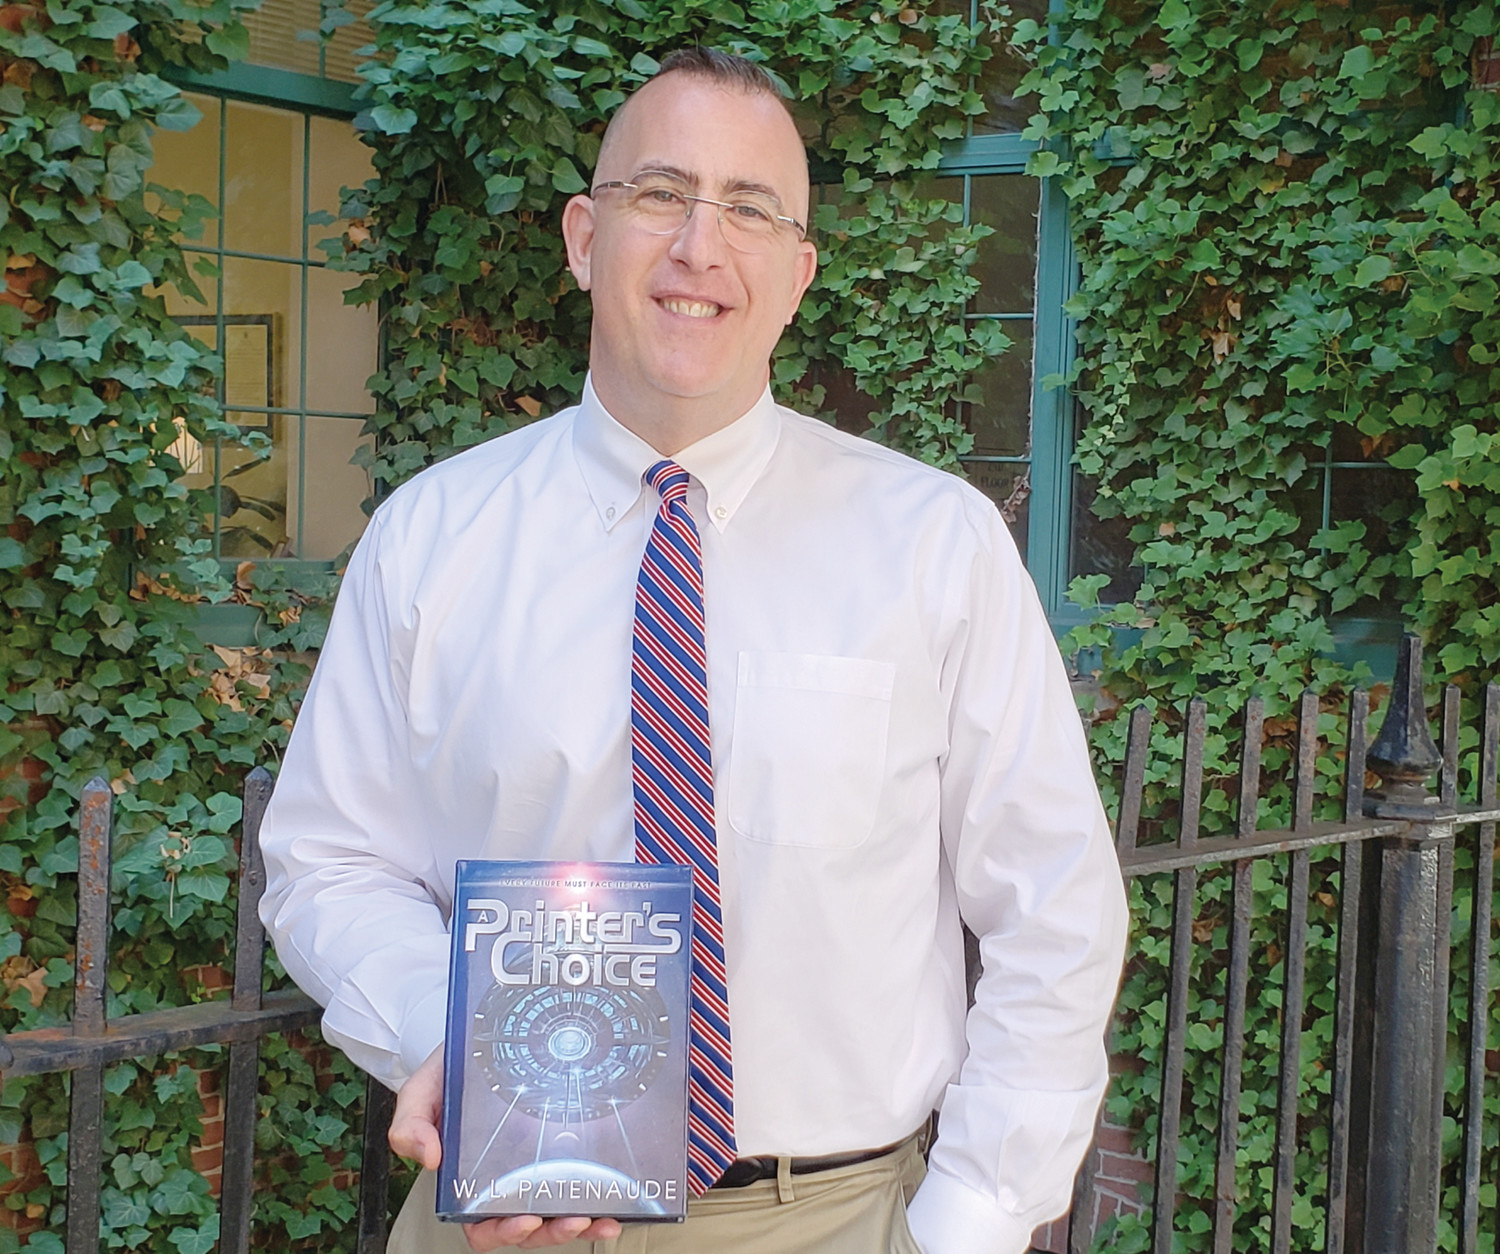 William Patenaude with his recently released book entitled “A Printer’s Choice,” a murder-mystery novel set in outer space.